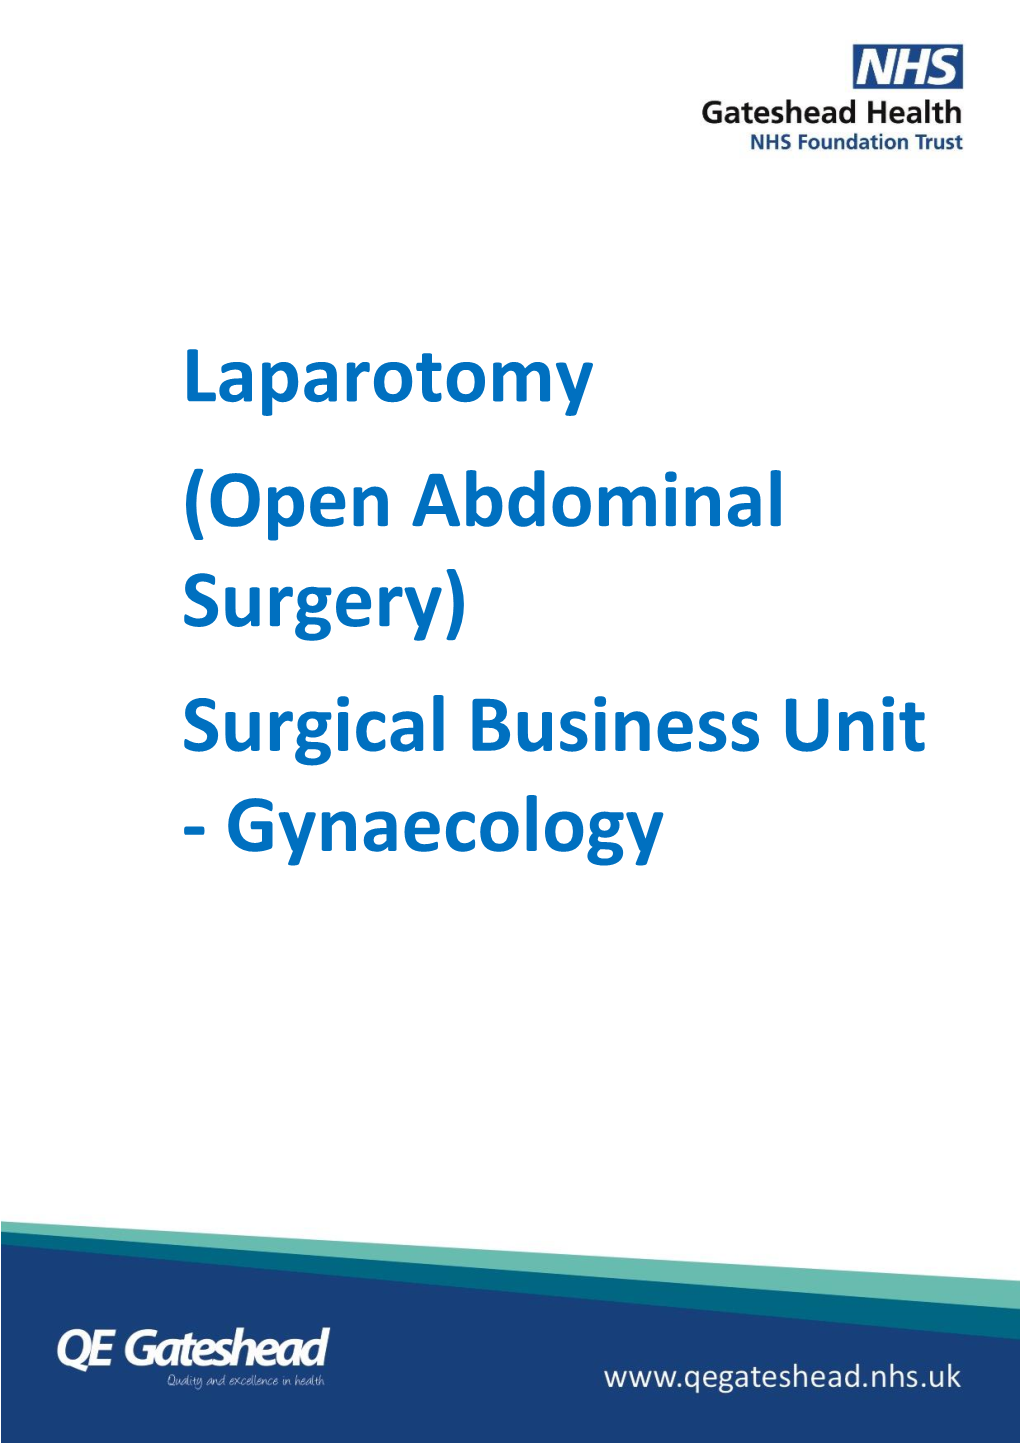 Laparotomy (Open Abdominal Surgery) Surgical Business Unit - Gynaecology